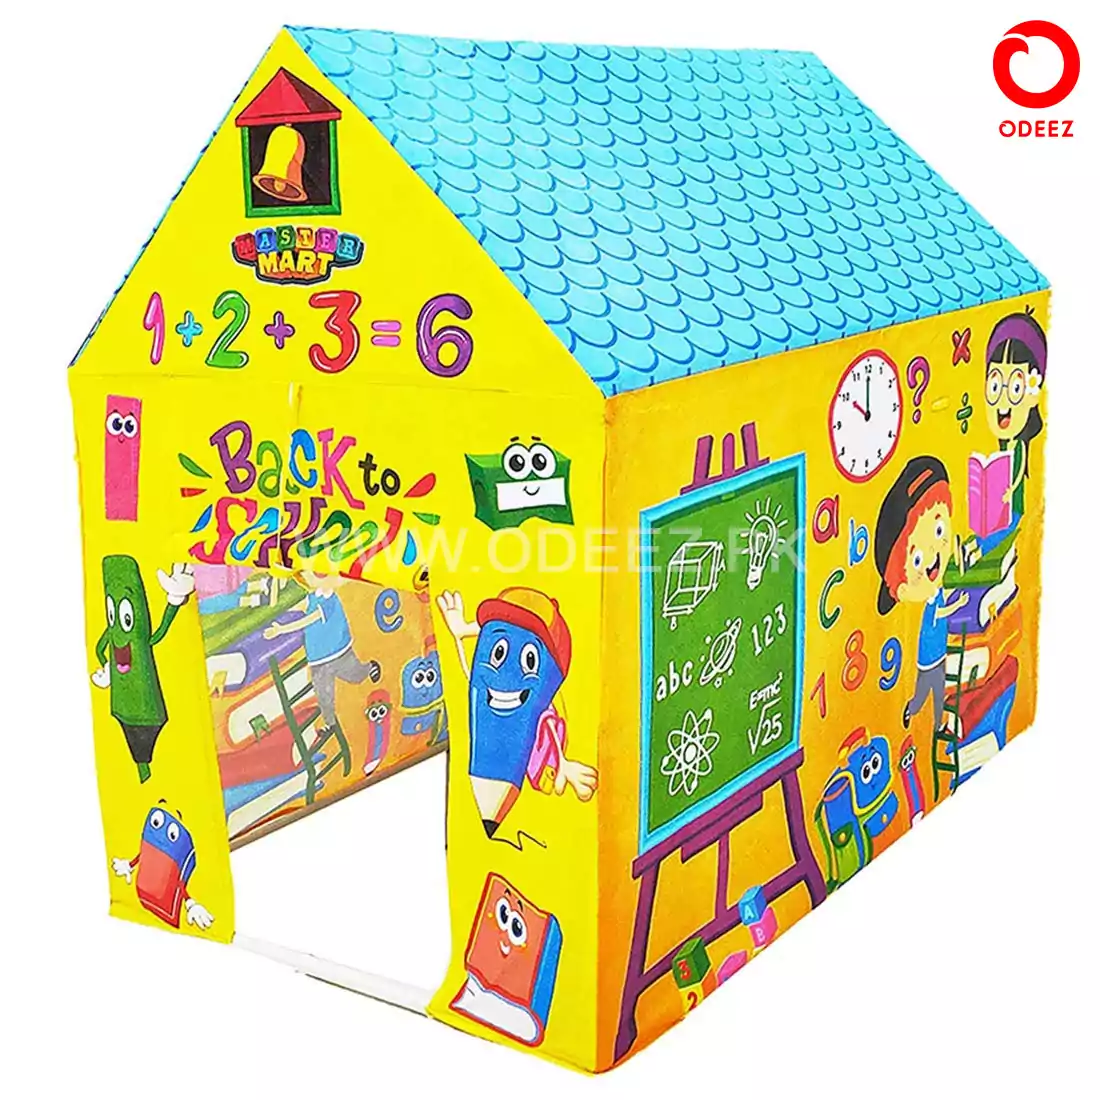 School House Play Tent for Kids